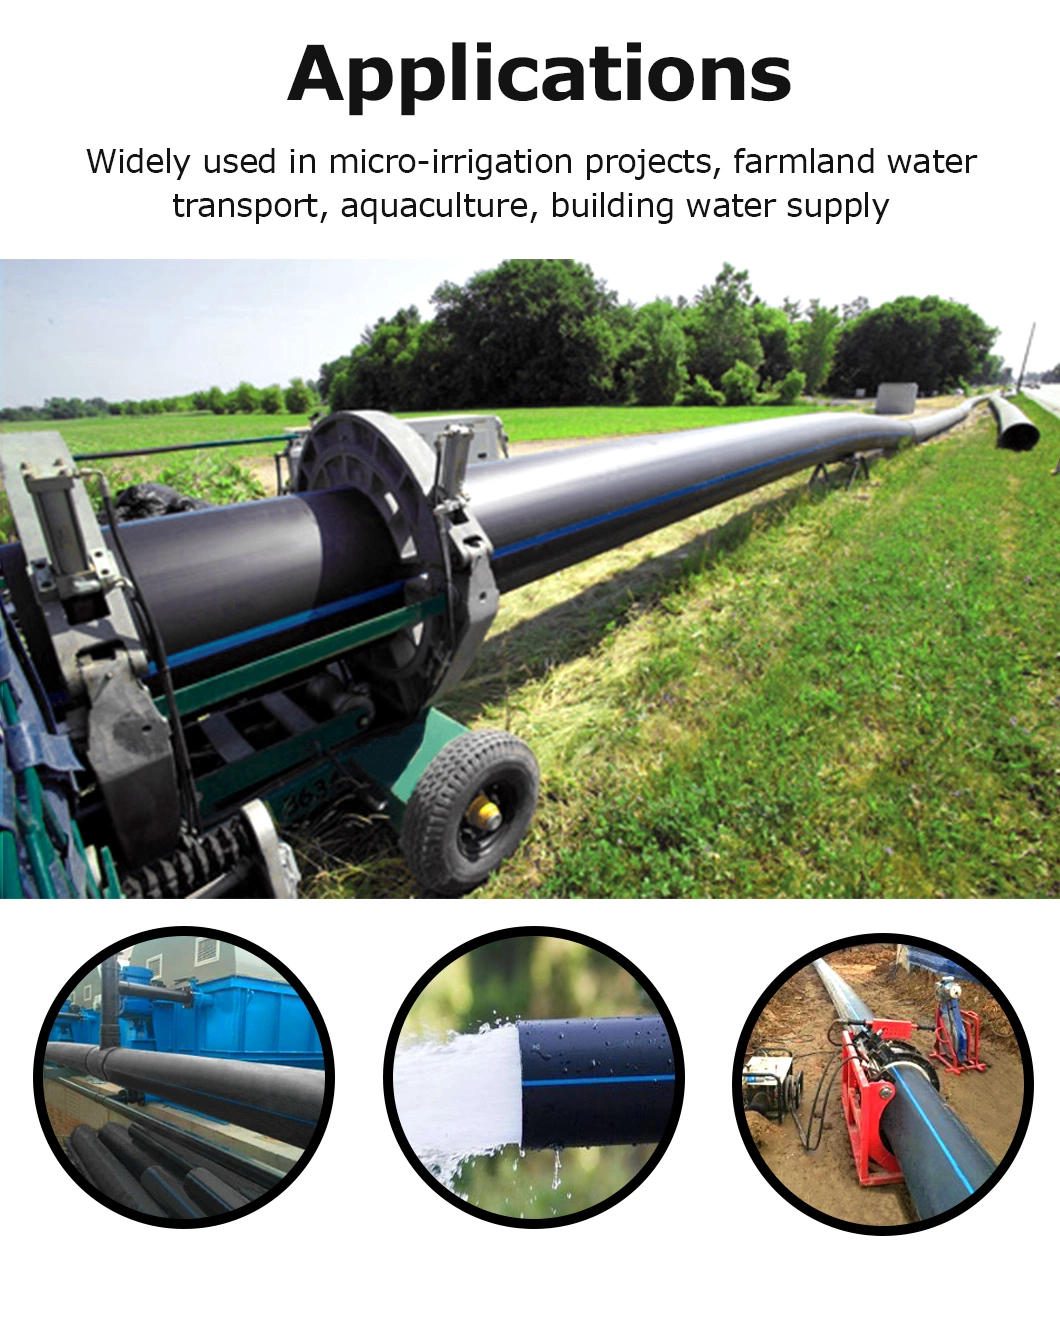 1.5 1 Inch Poly HDPE Irrigation Pipe